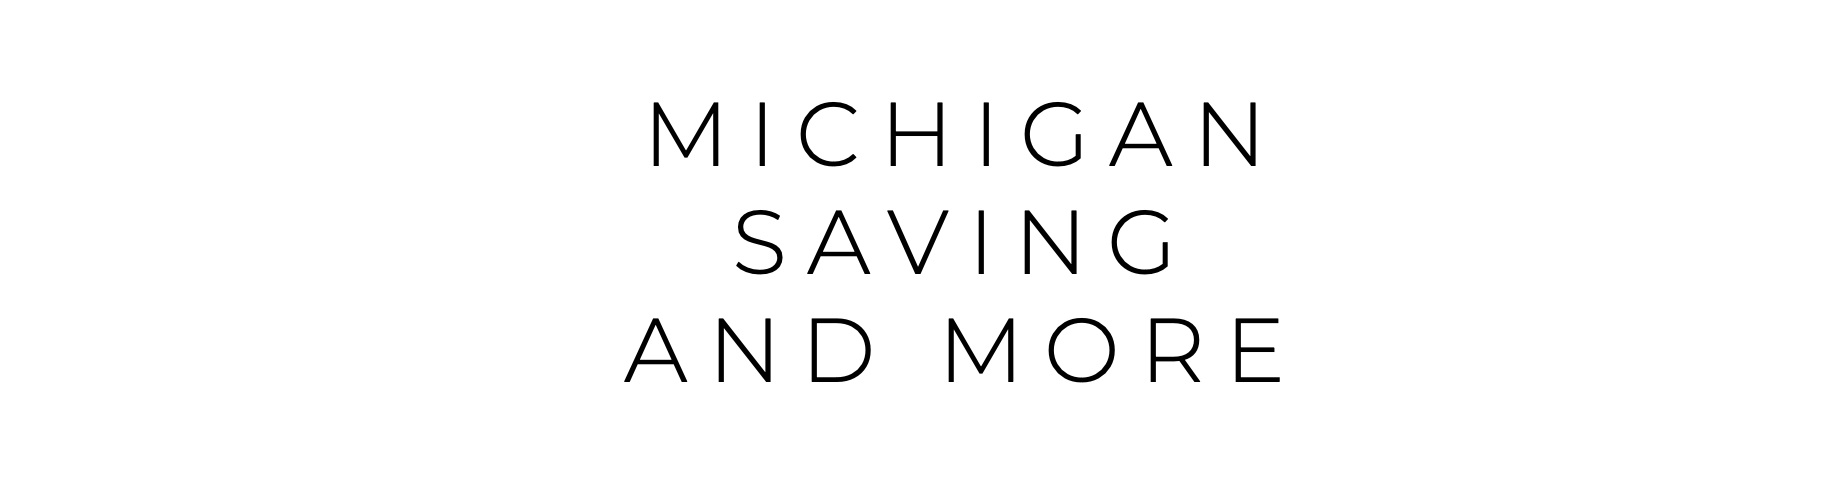 MICHIGAN SAVING AND MORE - Featured Hand Sanitizer